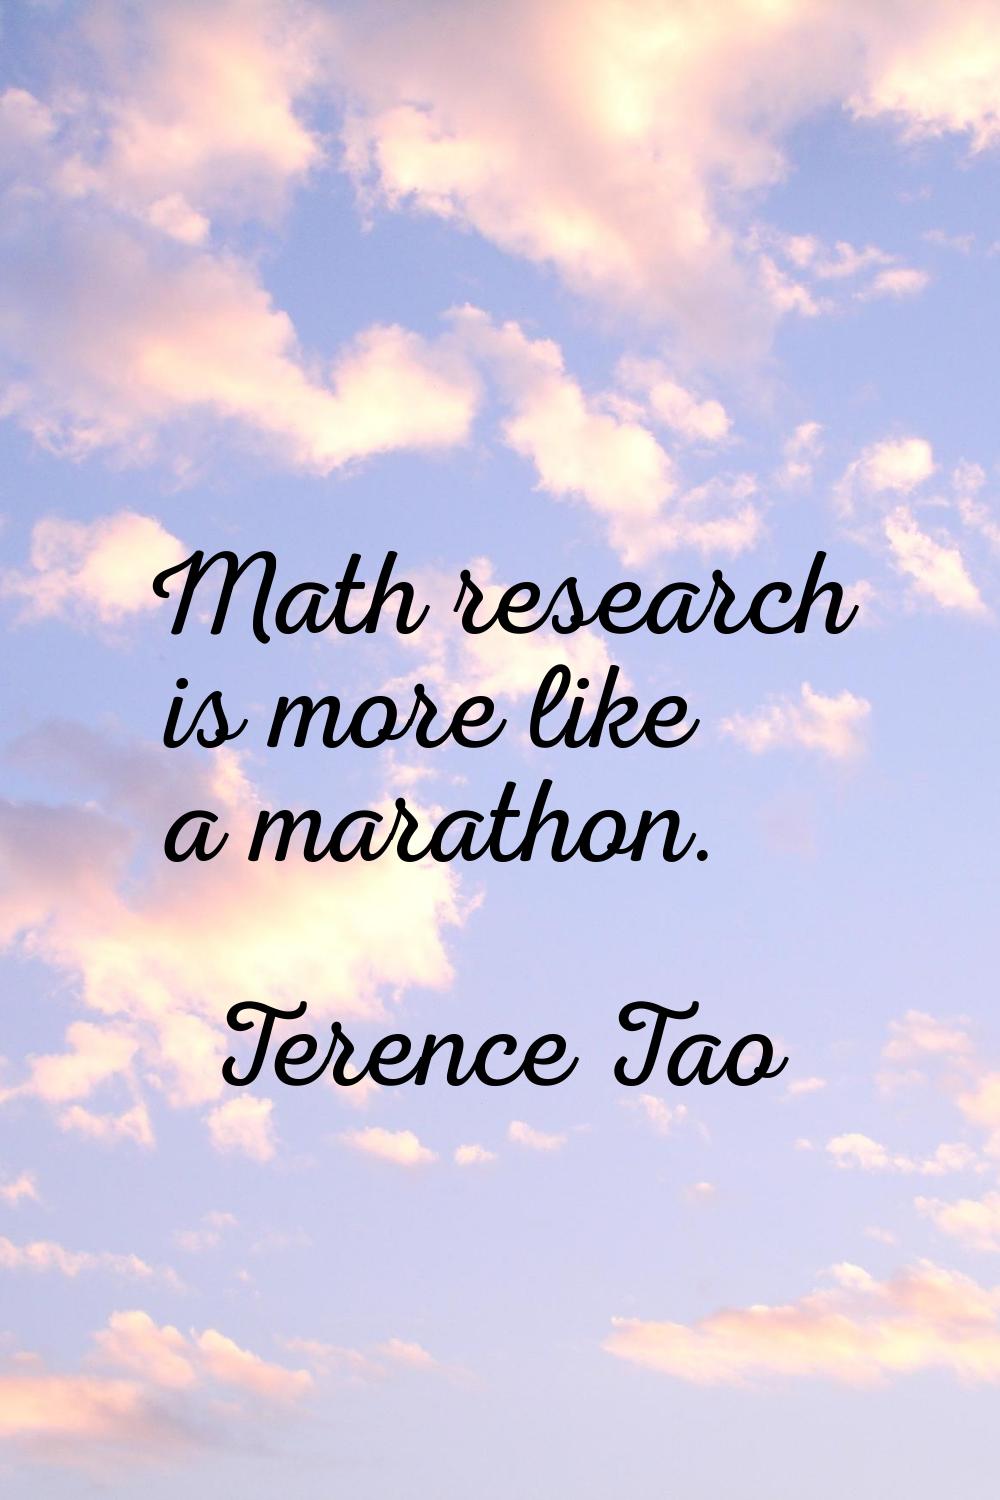 Math research is more like a marathon.